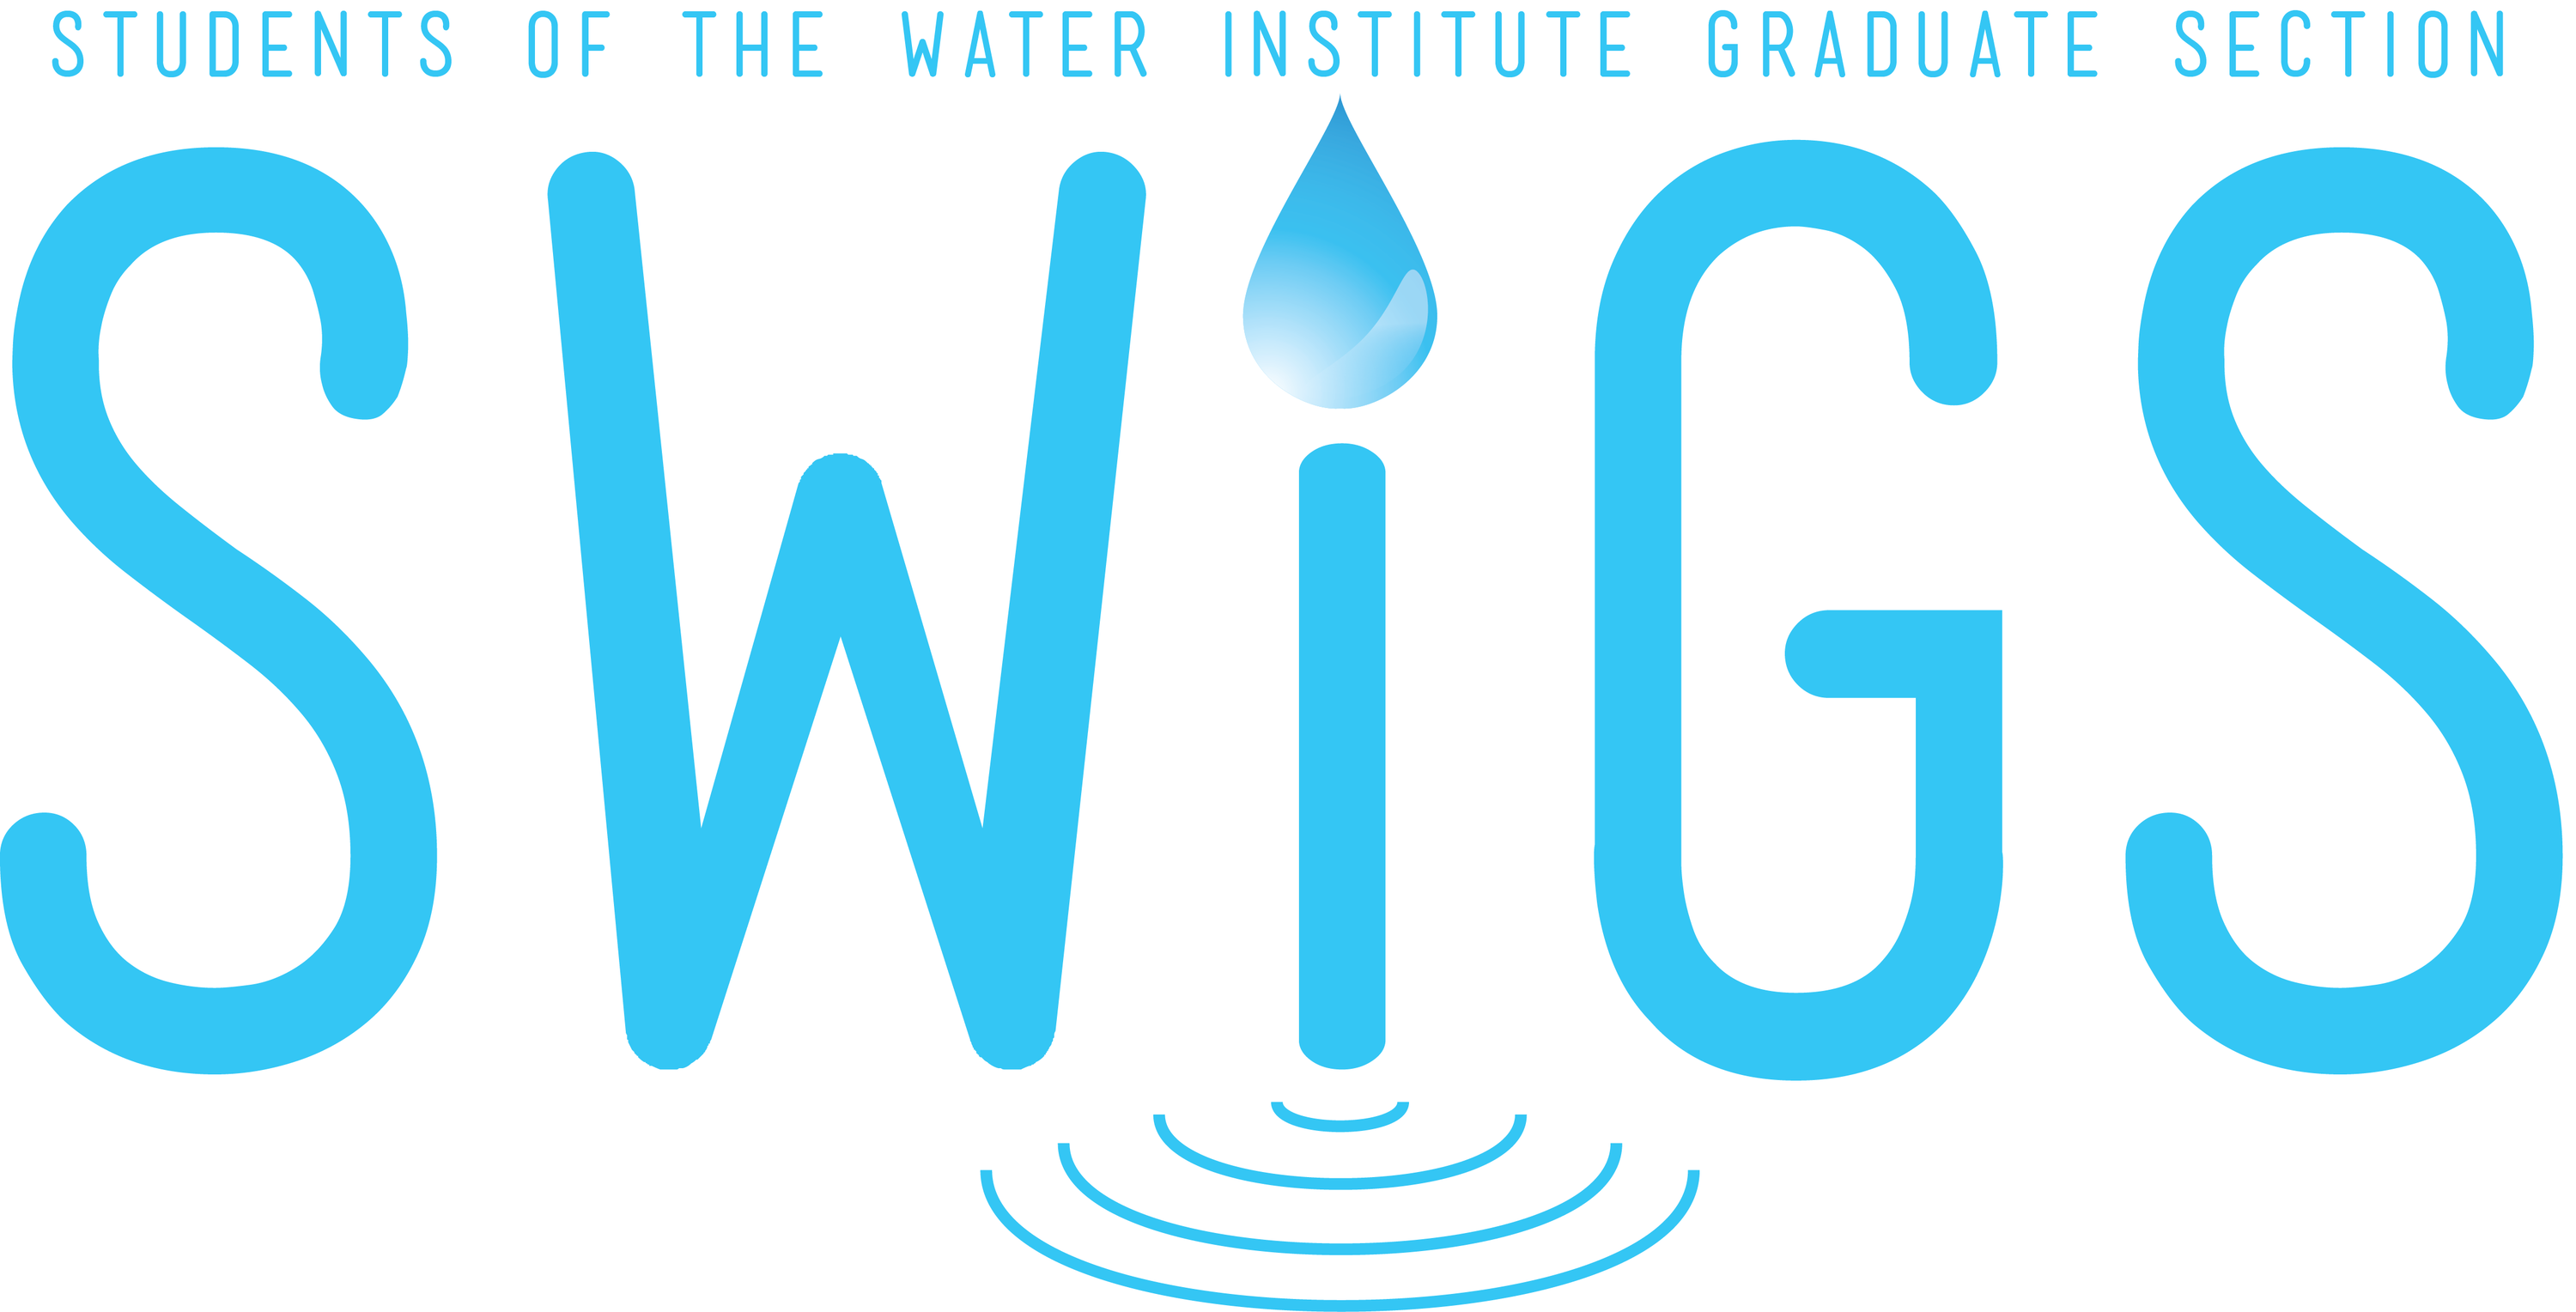 Students of the Water Institute Graduate Section (SWIGS) logo